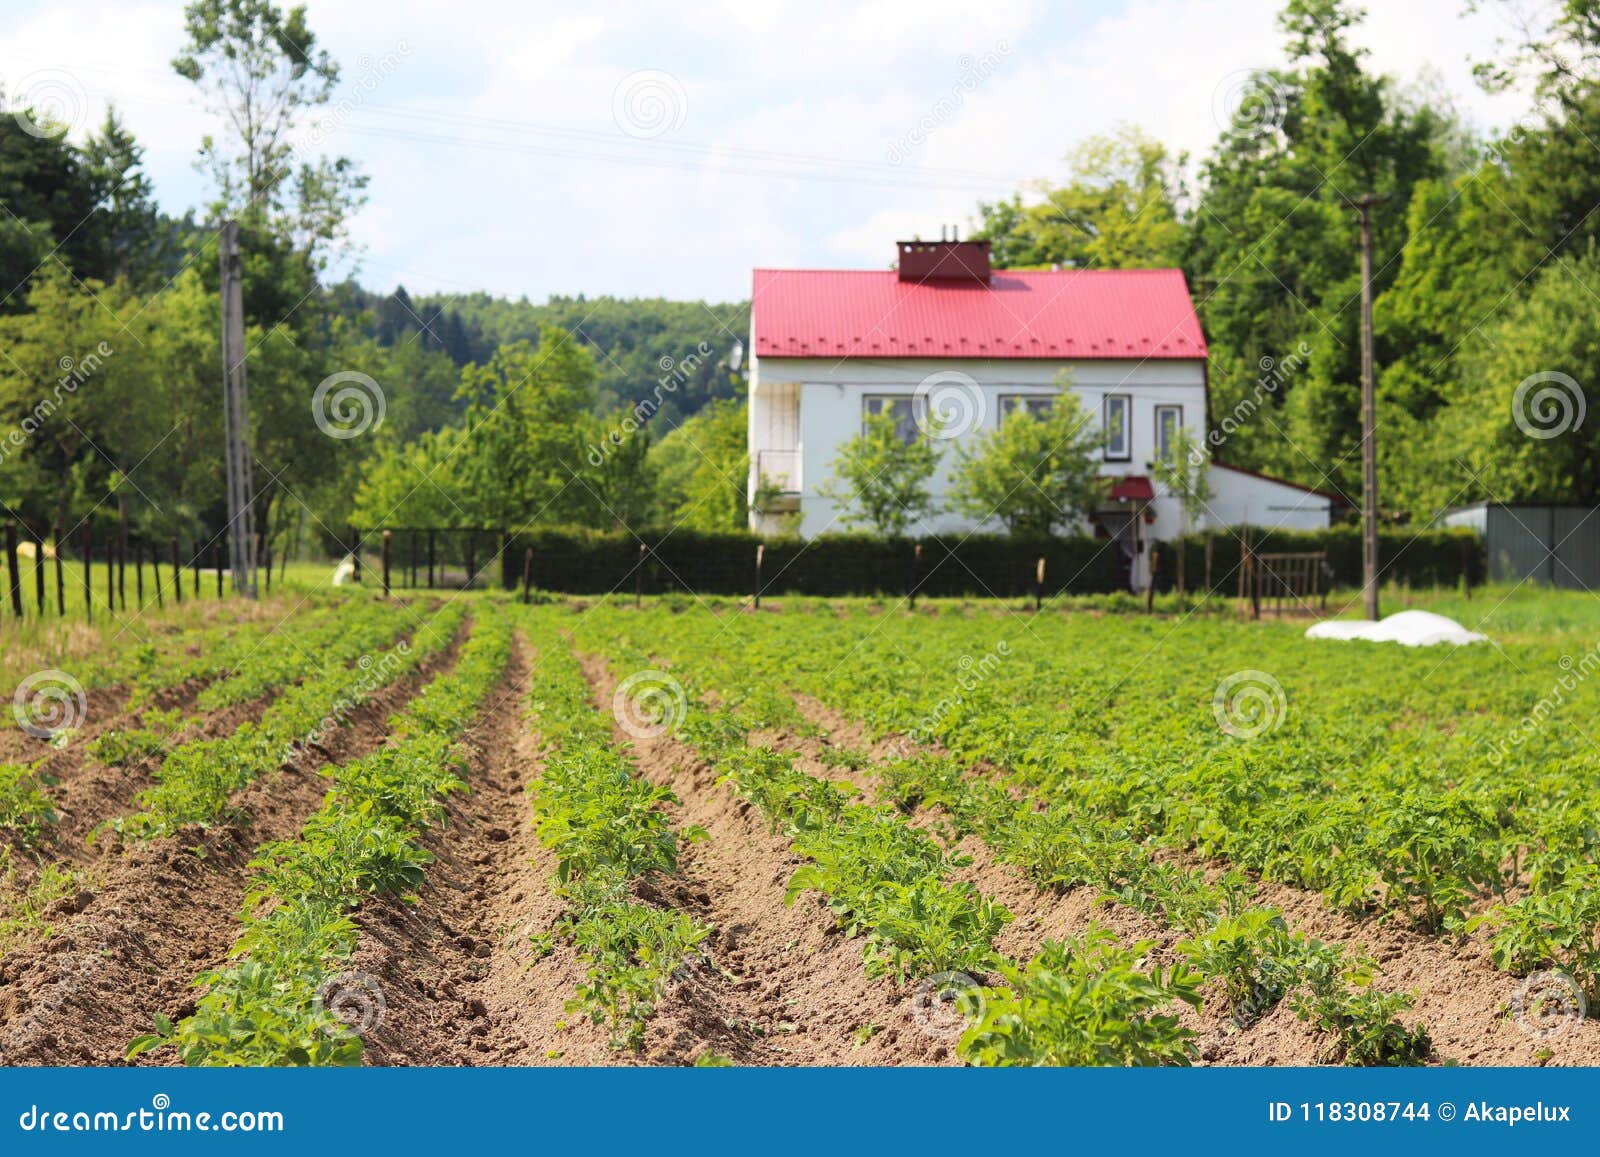 A Small Plantation Of Bushes Of A Young Carofel On The Backyard Cultivation Of Agricultural Crops Seasonal Plants For Cooking H Stock Photo Image Of Filed Cultivation 118308744